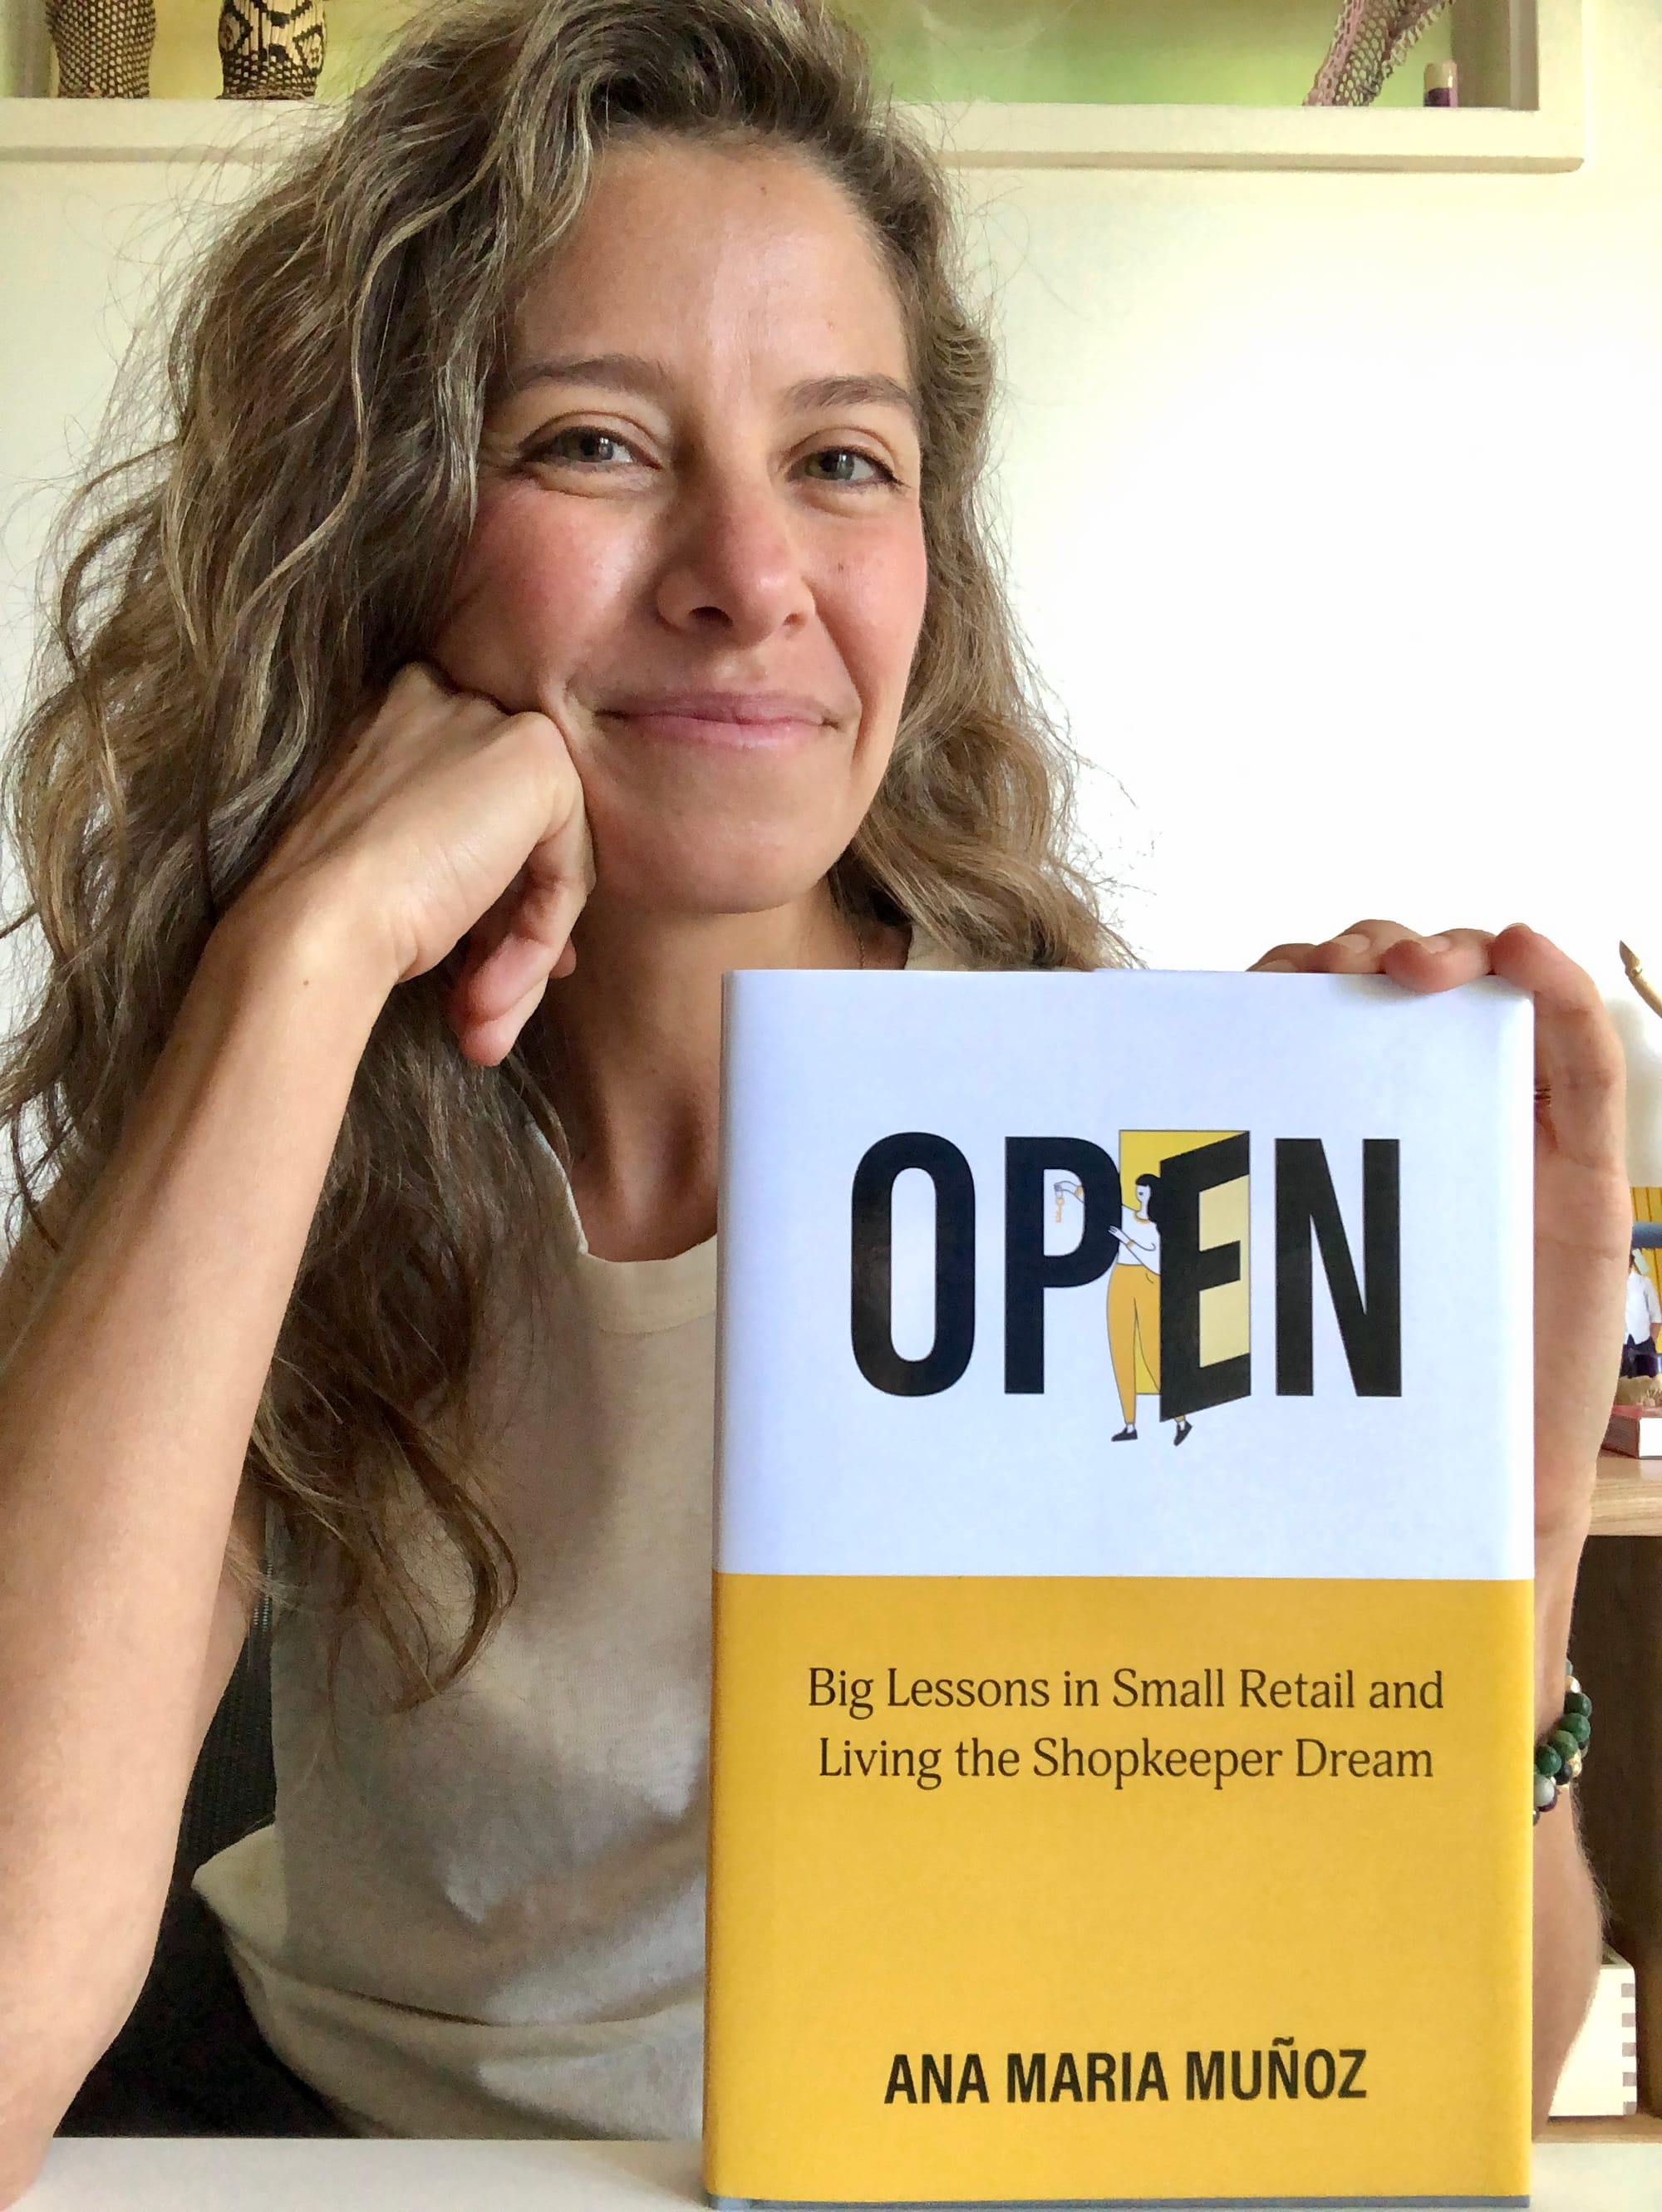 Ana Maria Muñoz, Author of OPEN: Big Lessons in Small Retail and Living the Shopkeeper Dream